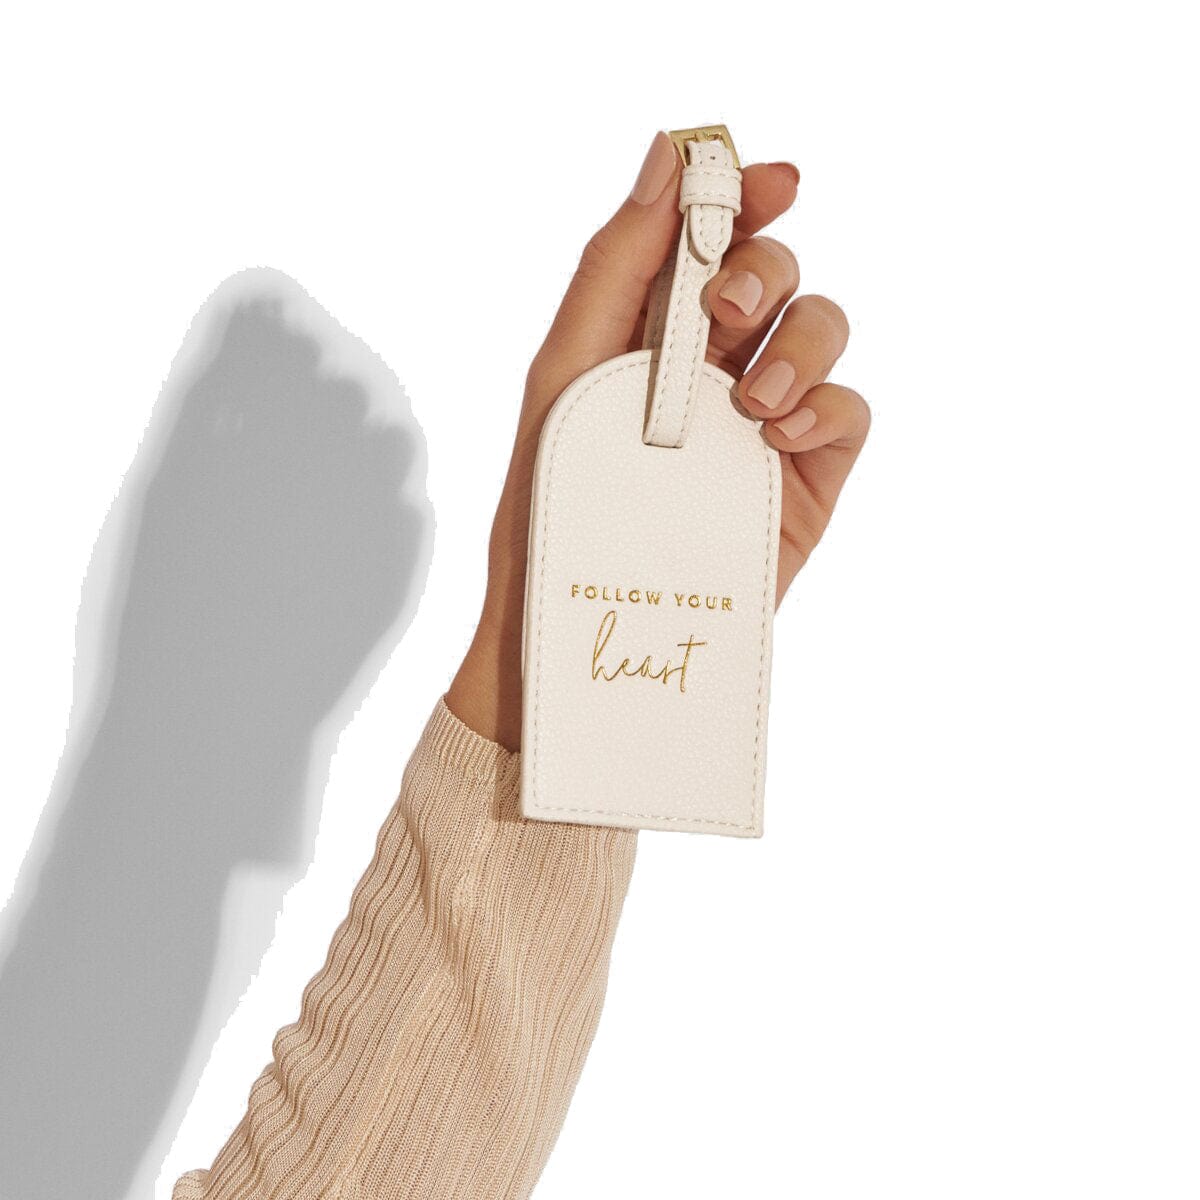 Katie Loxton Travel Accessories Katie Loxton Luggage Tag - Follow Your Heart - Off White